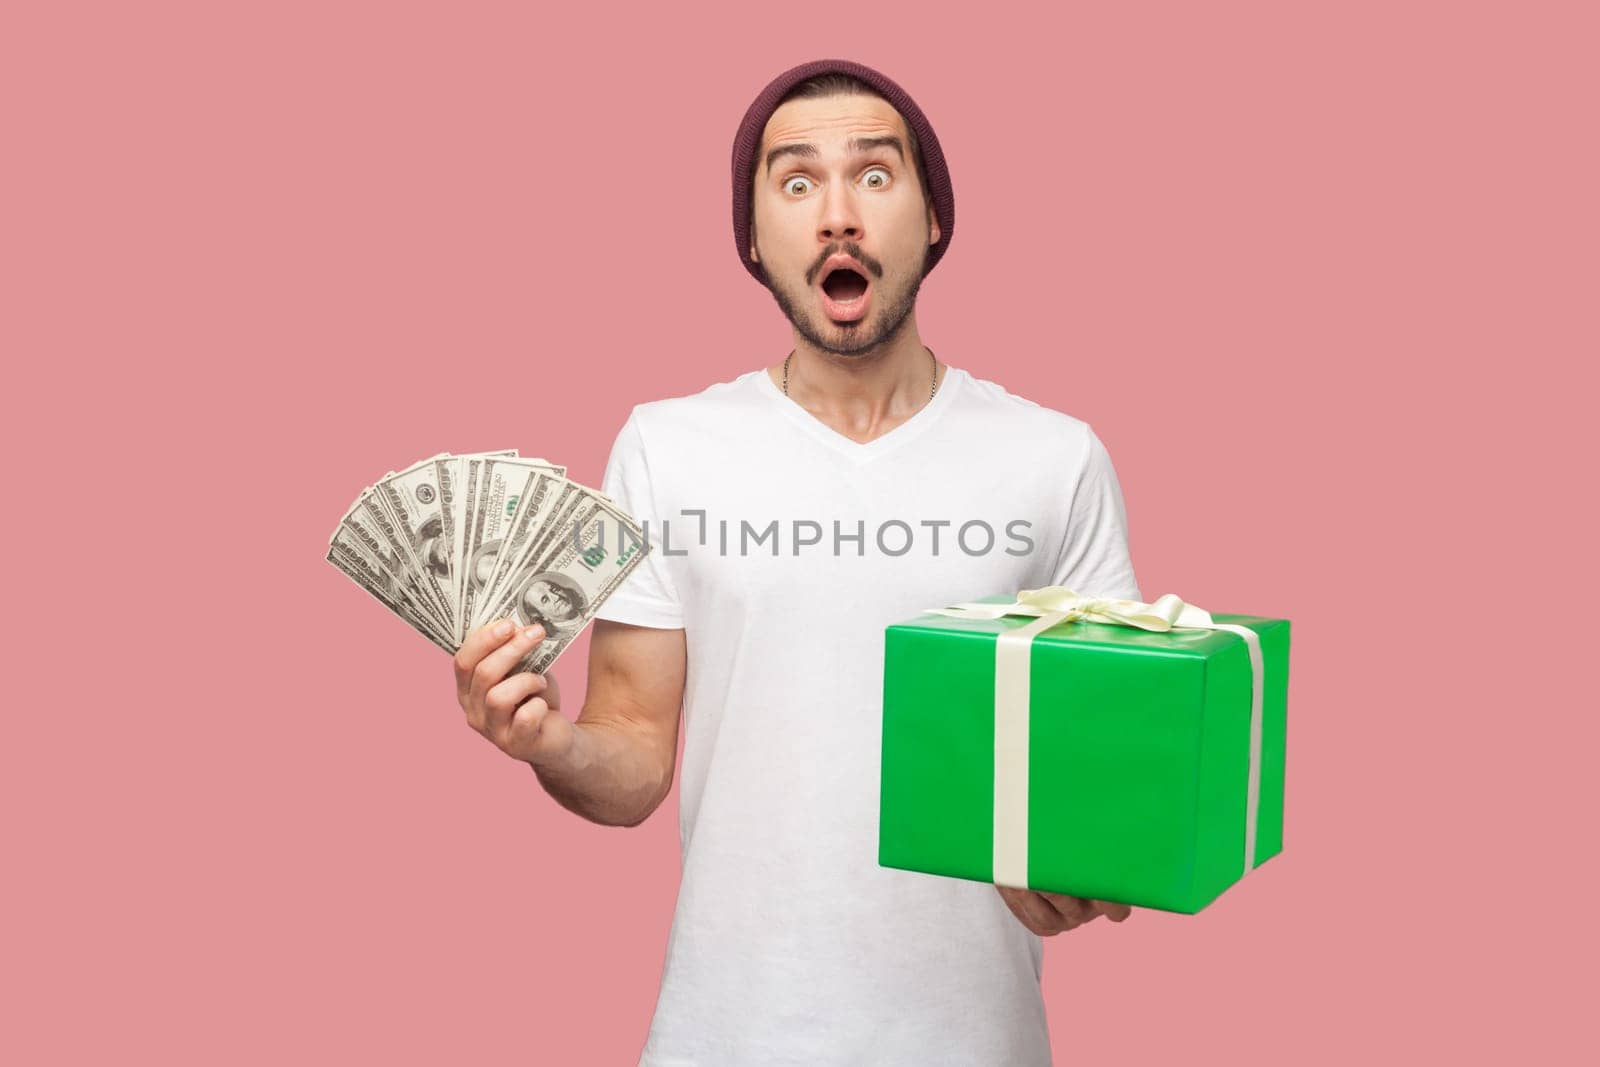 Portrait of shocked surprised man in white T-shirt and beany hat standing with dollar banknotes and green present box, looking at camera with open mouth. Indoor studio shot isolated on pink background